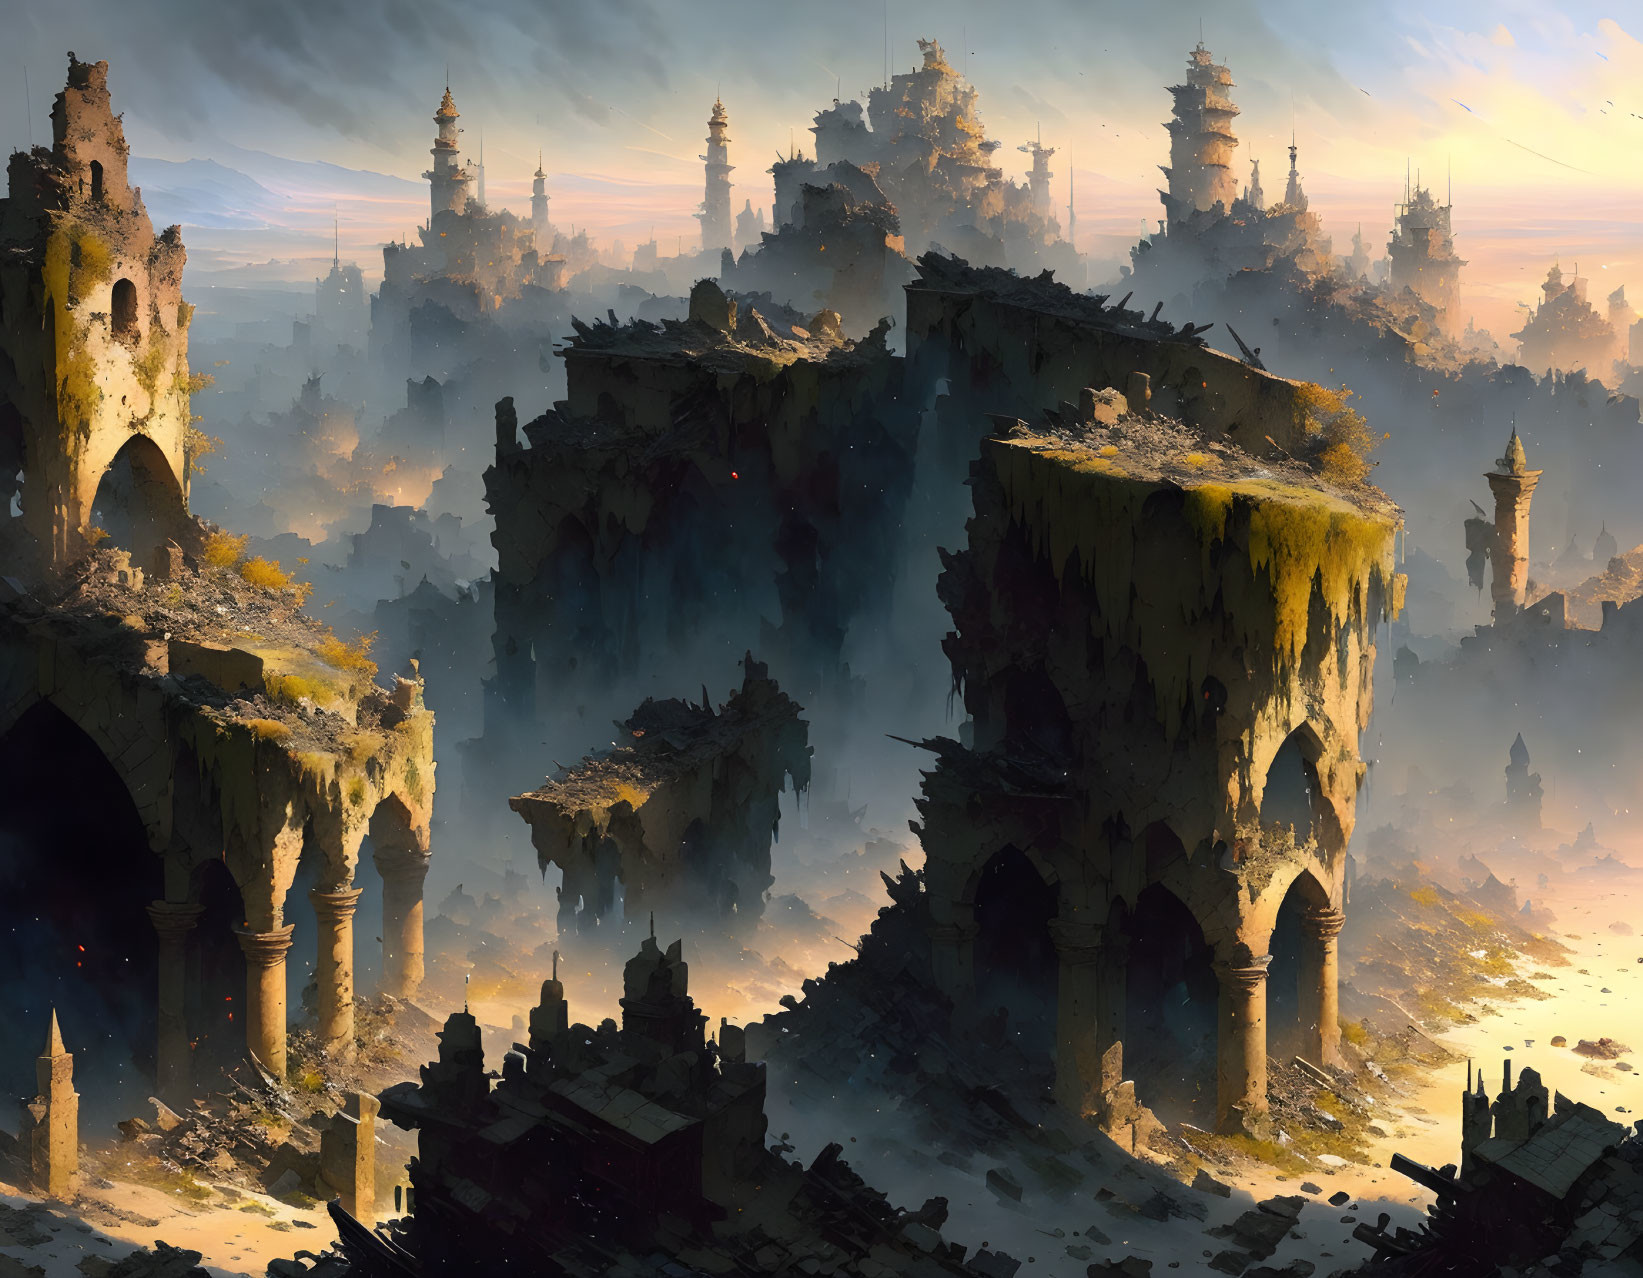 Fantasy landscape with ancient ruins and towering spires in golden light and mists